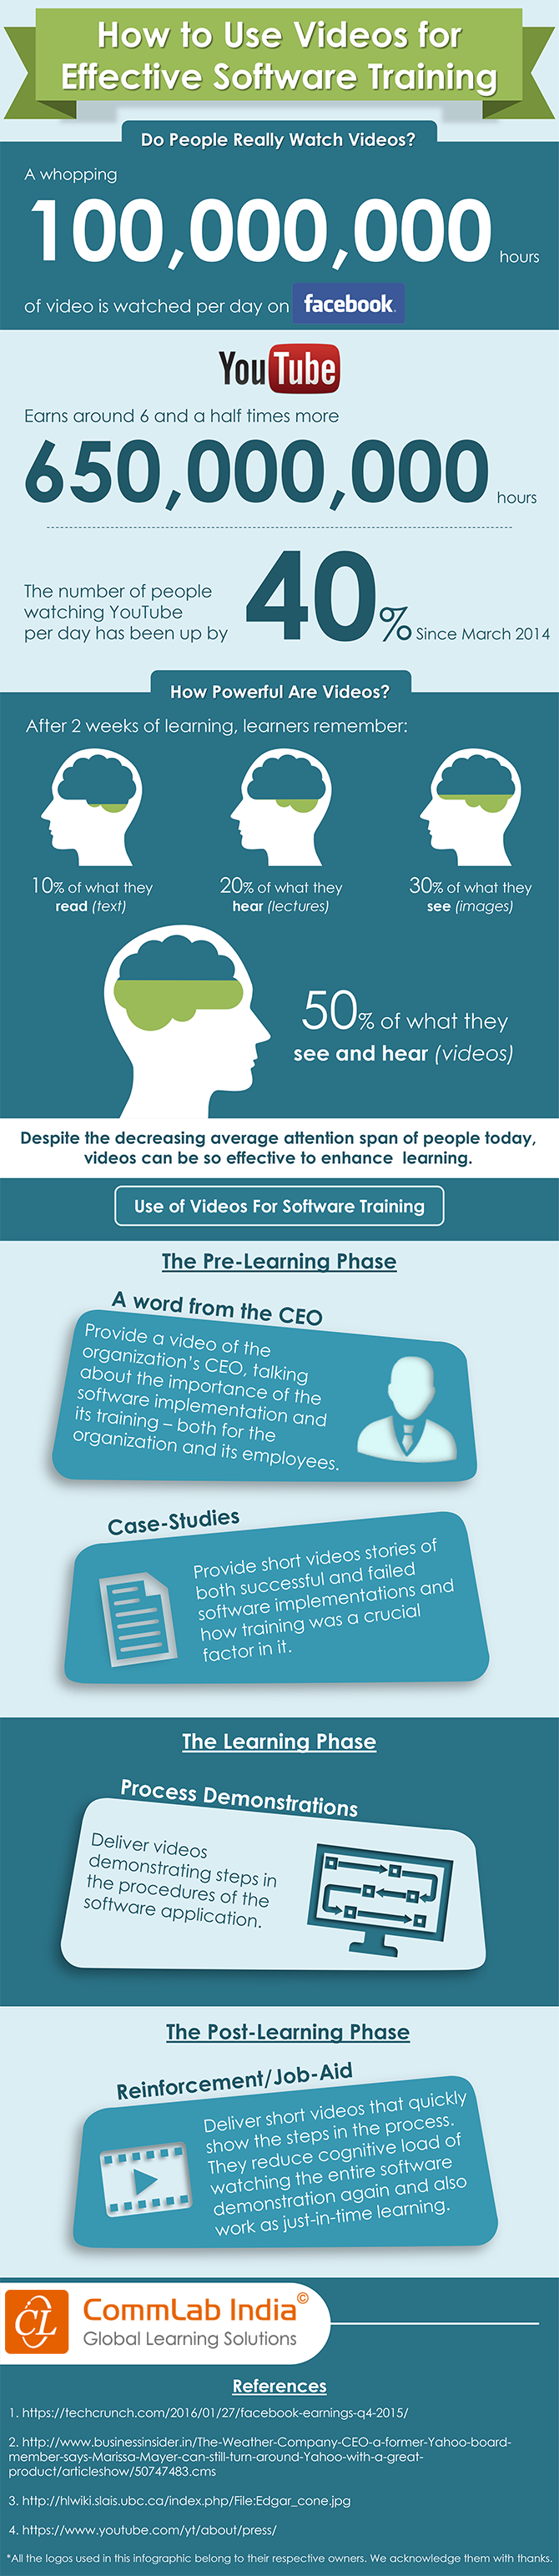 How to Use Videos for Effective Software Training [Infographic]